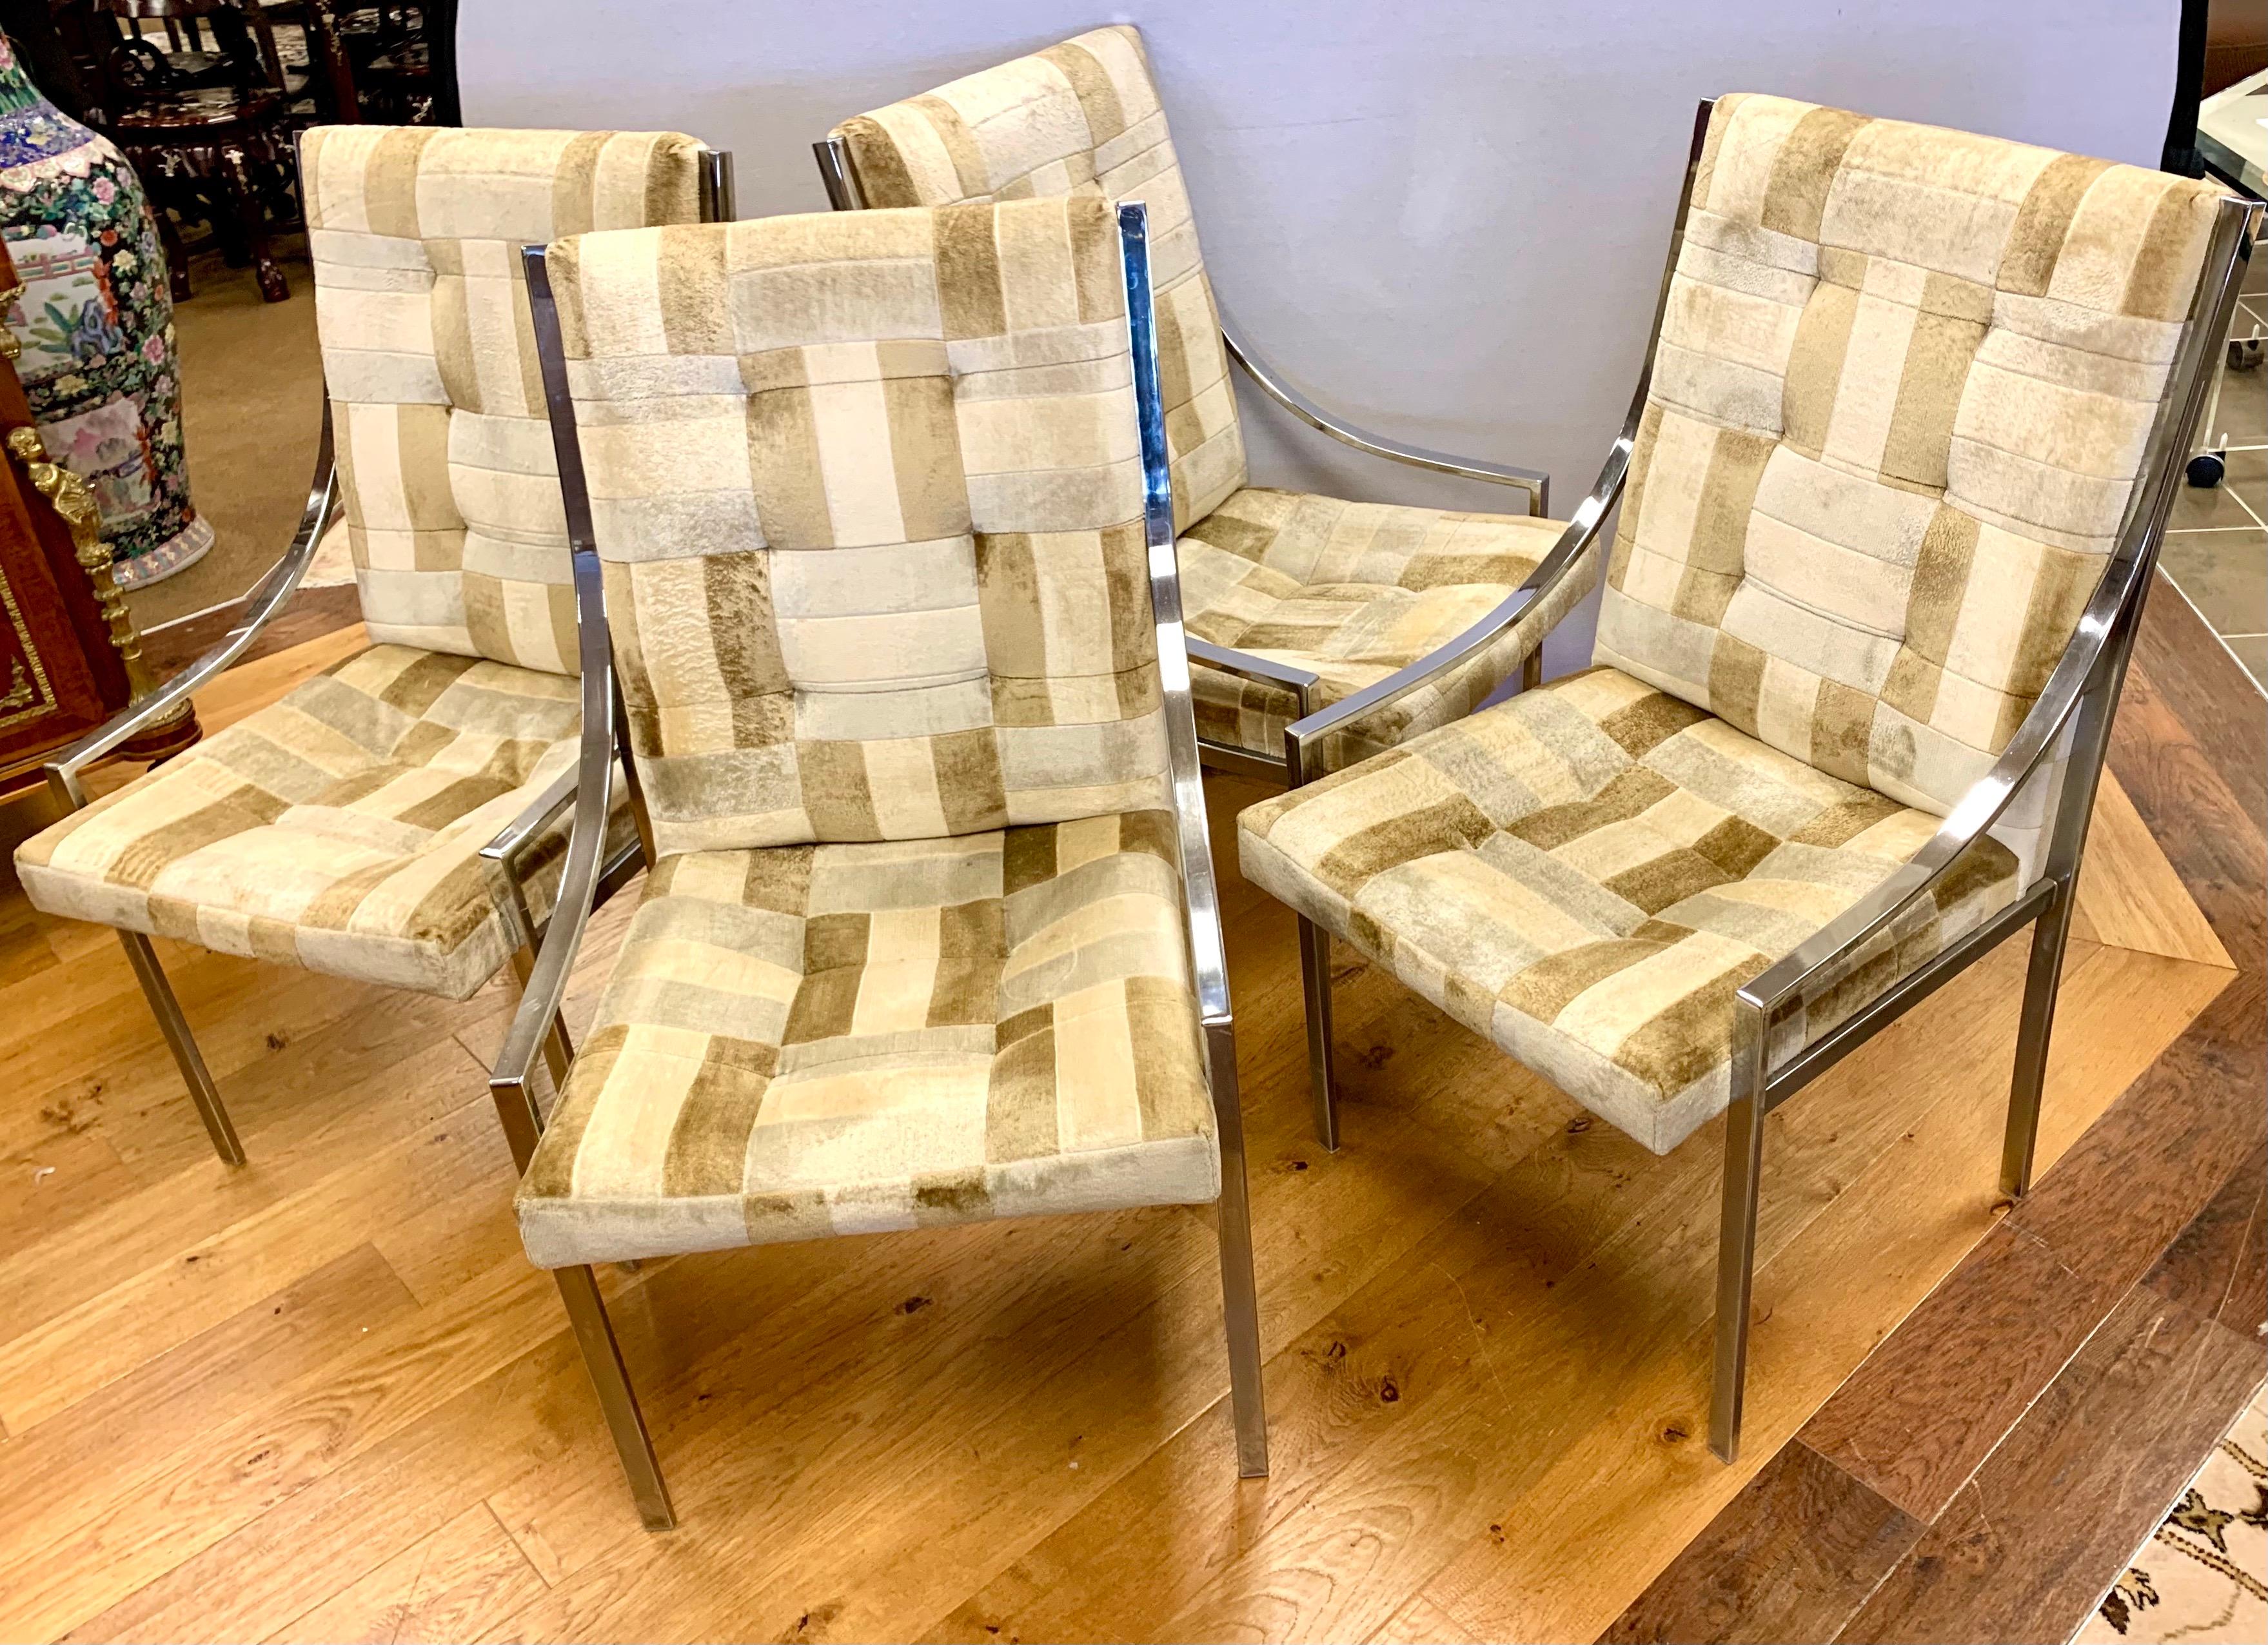 Set of 4 mid century Milo Baughman chrome dining chairs with original upholstery in a olive, gray and pale yellow velvet patchwork fabric.